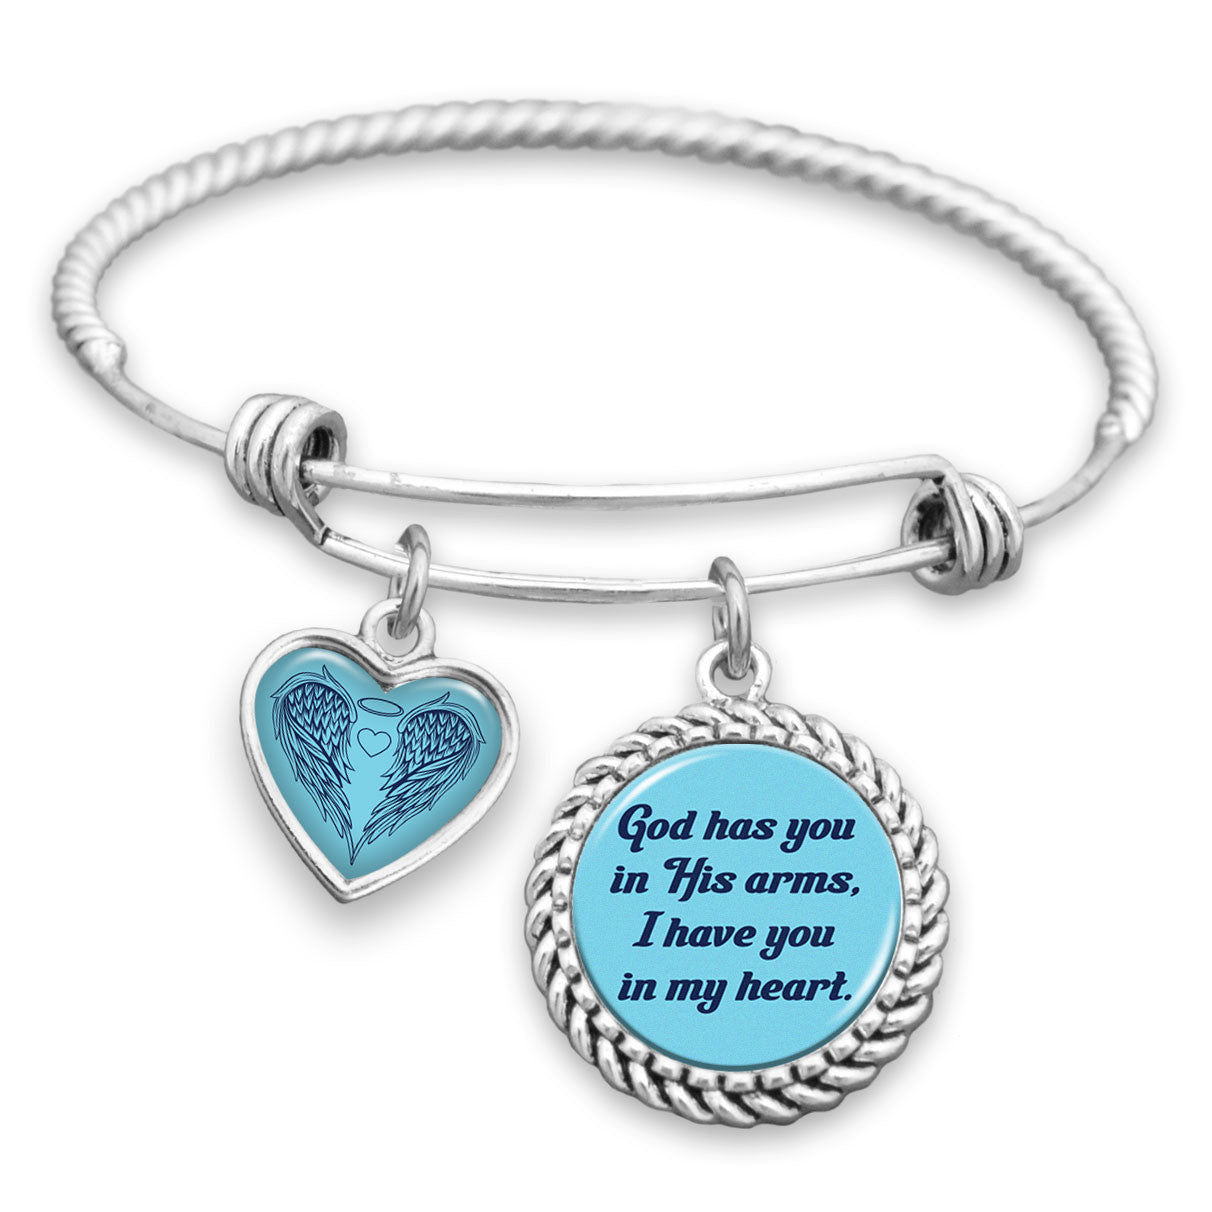 God Has You In His Arms, I Have You In My Heart Charm Bracelet